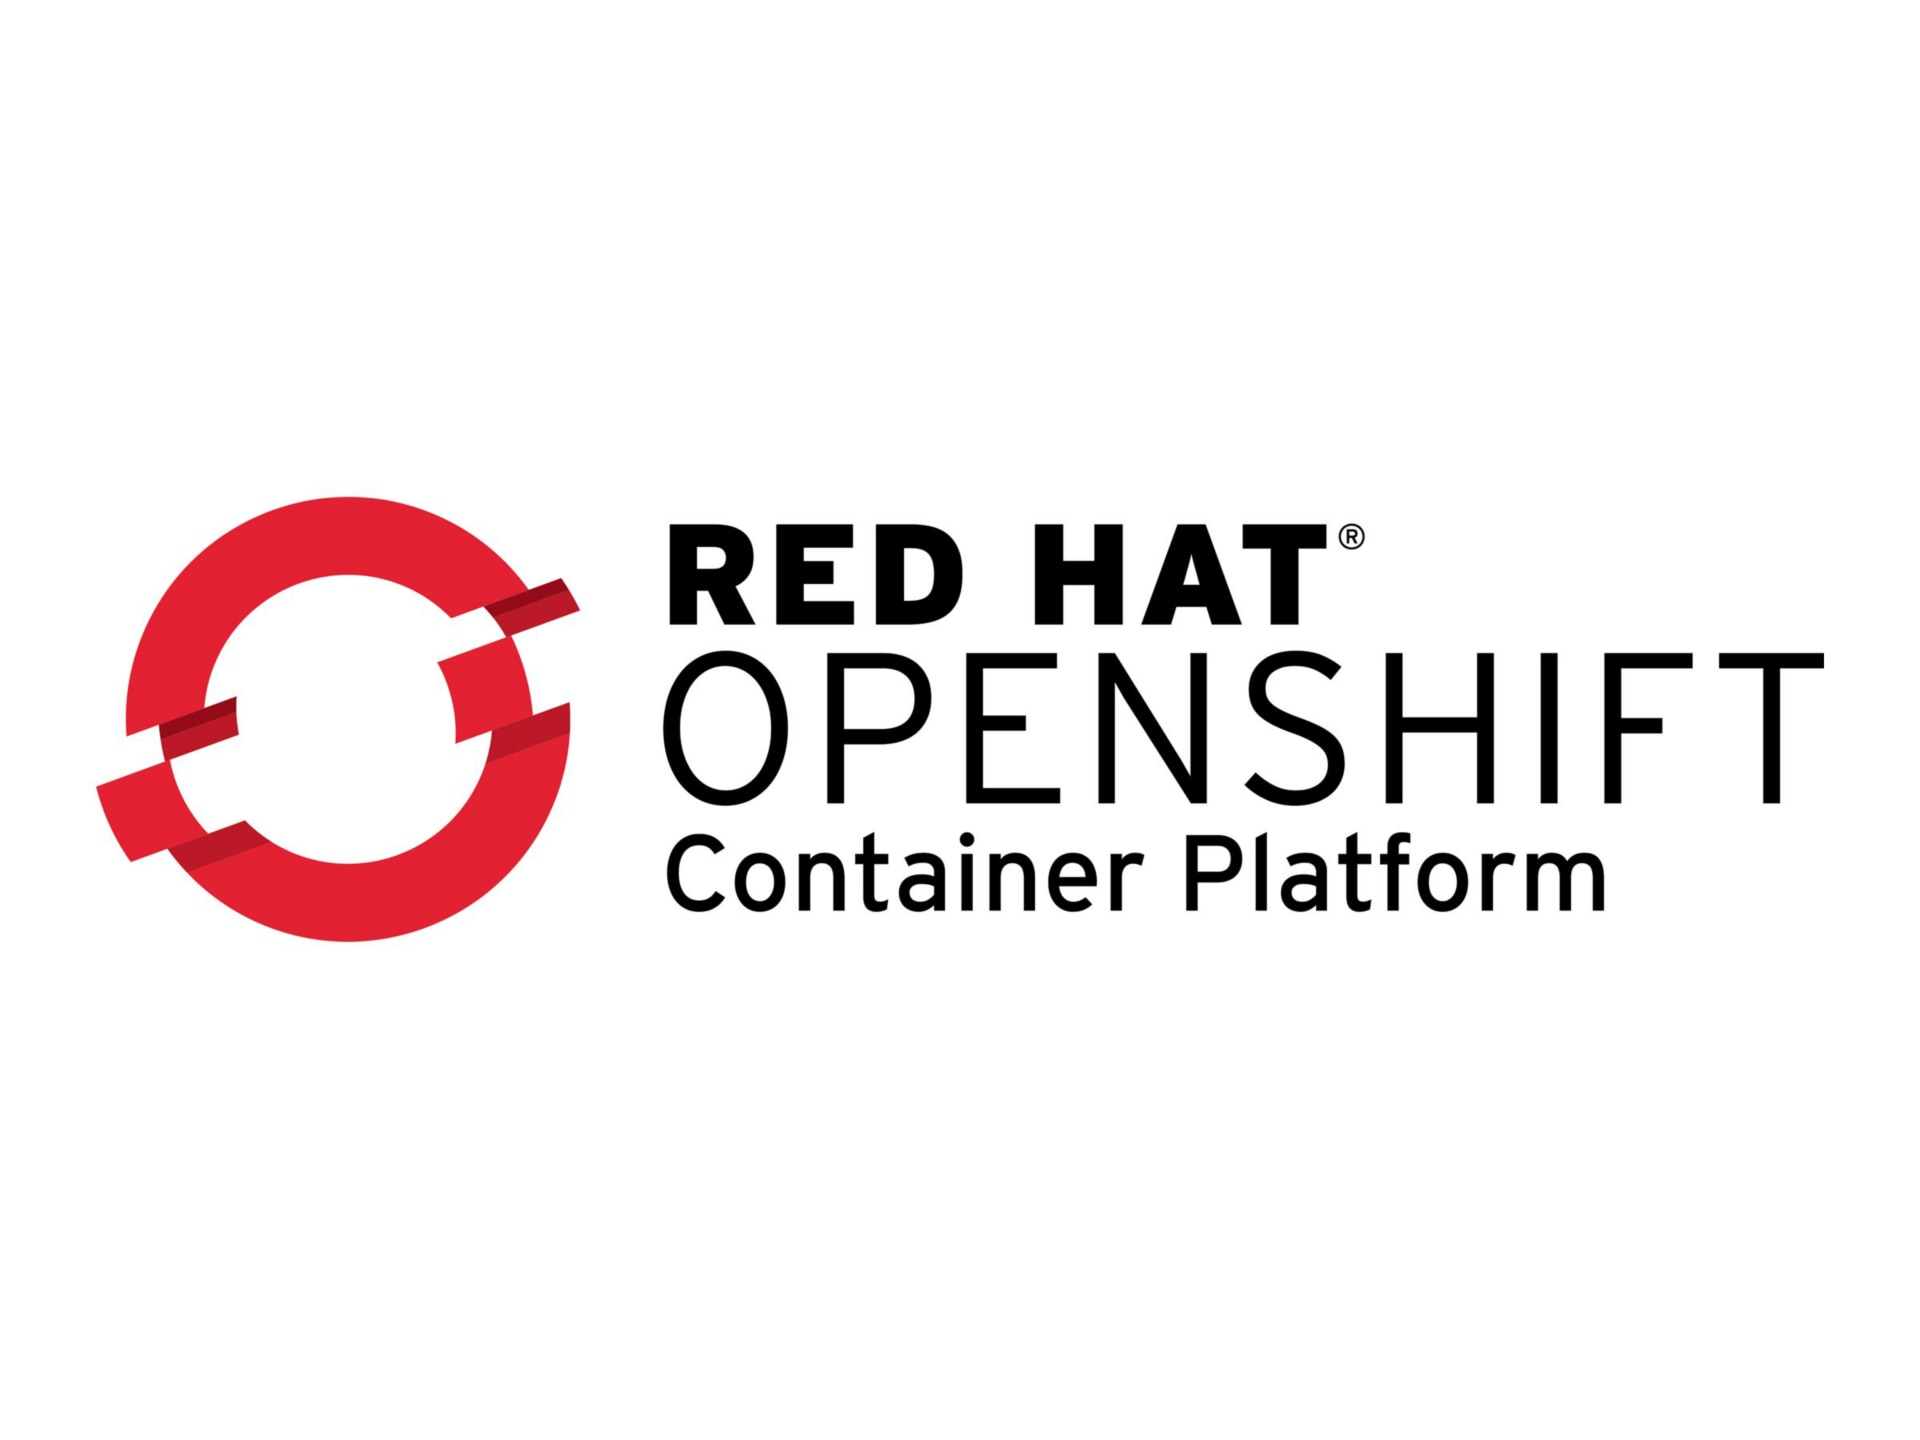 Red Hat OpenShift Container Platform - premium subscription (1 year) - 1 no